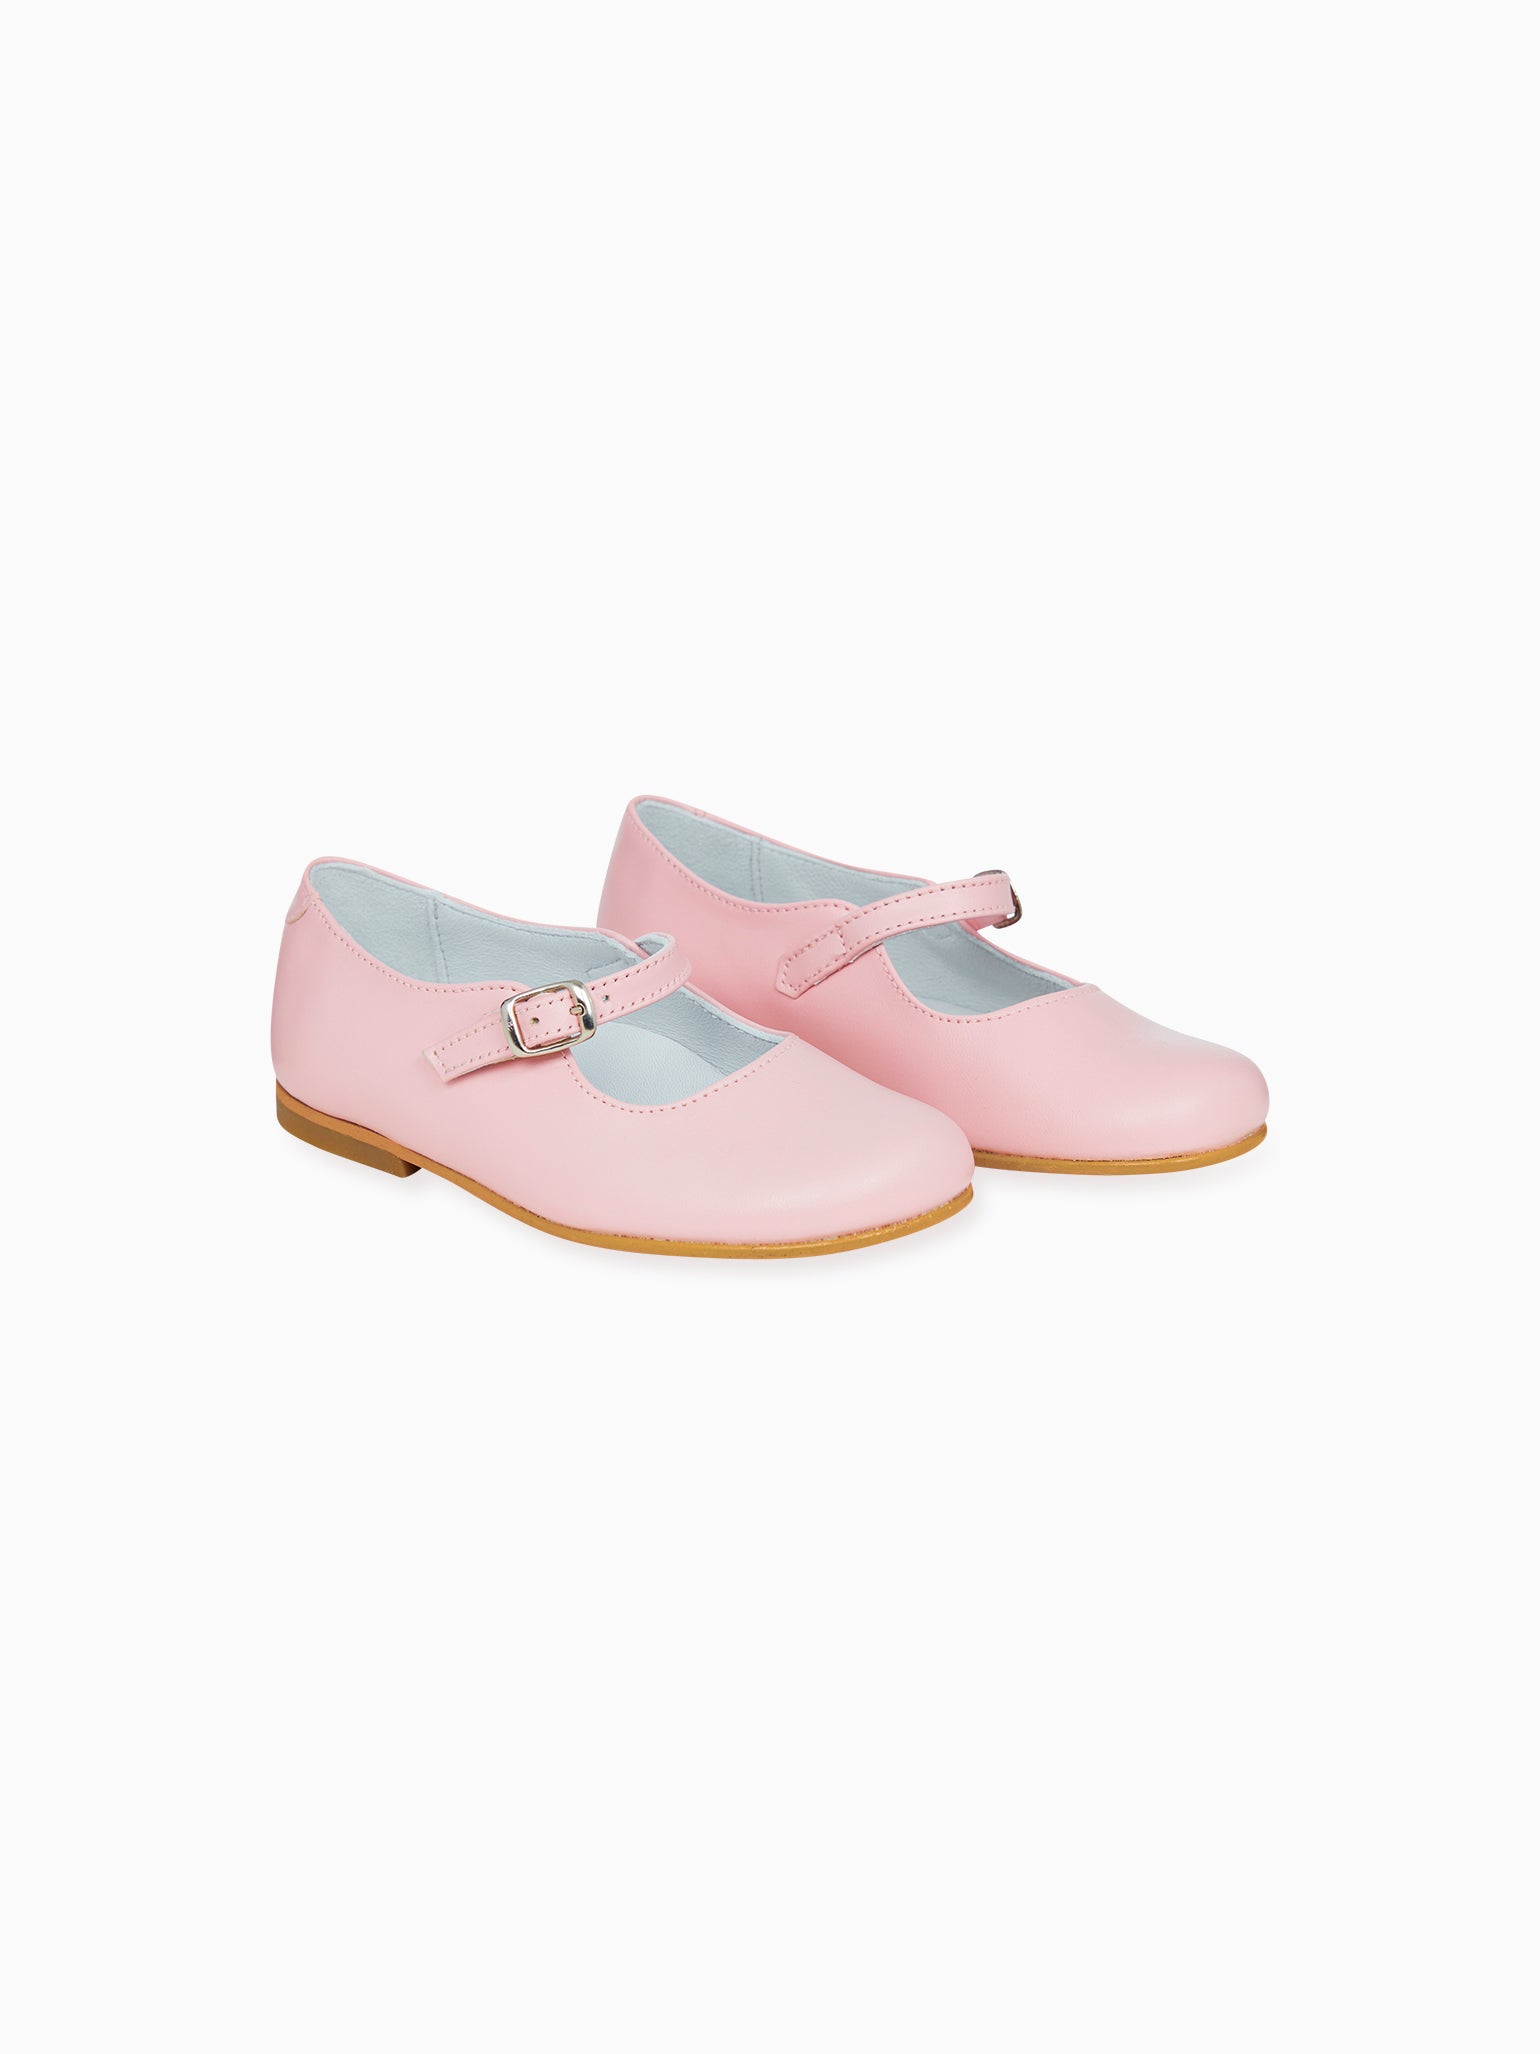 Light Pink Leather Girl Mary Jane Shoes